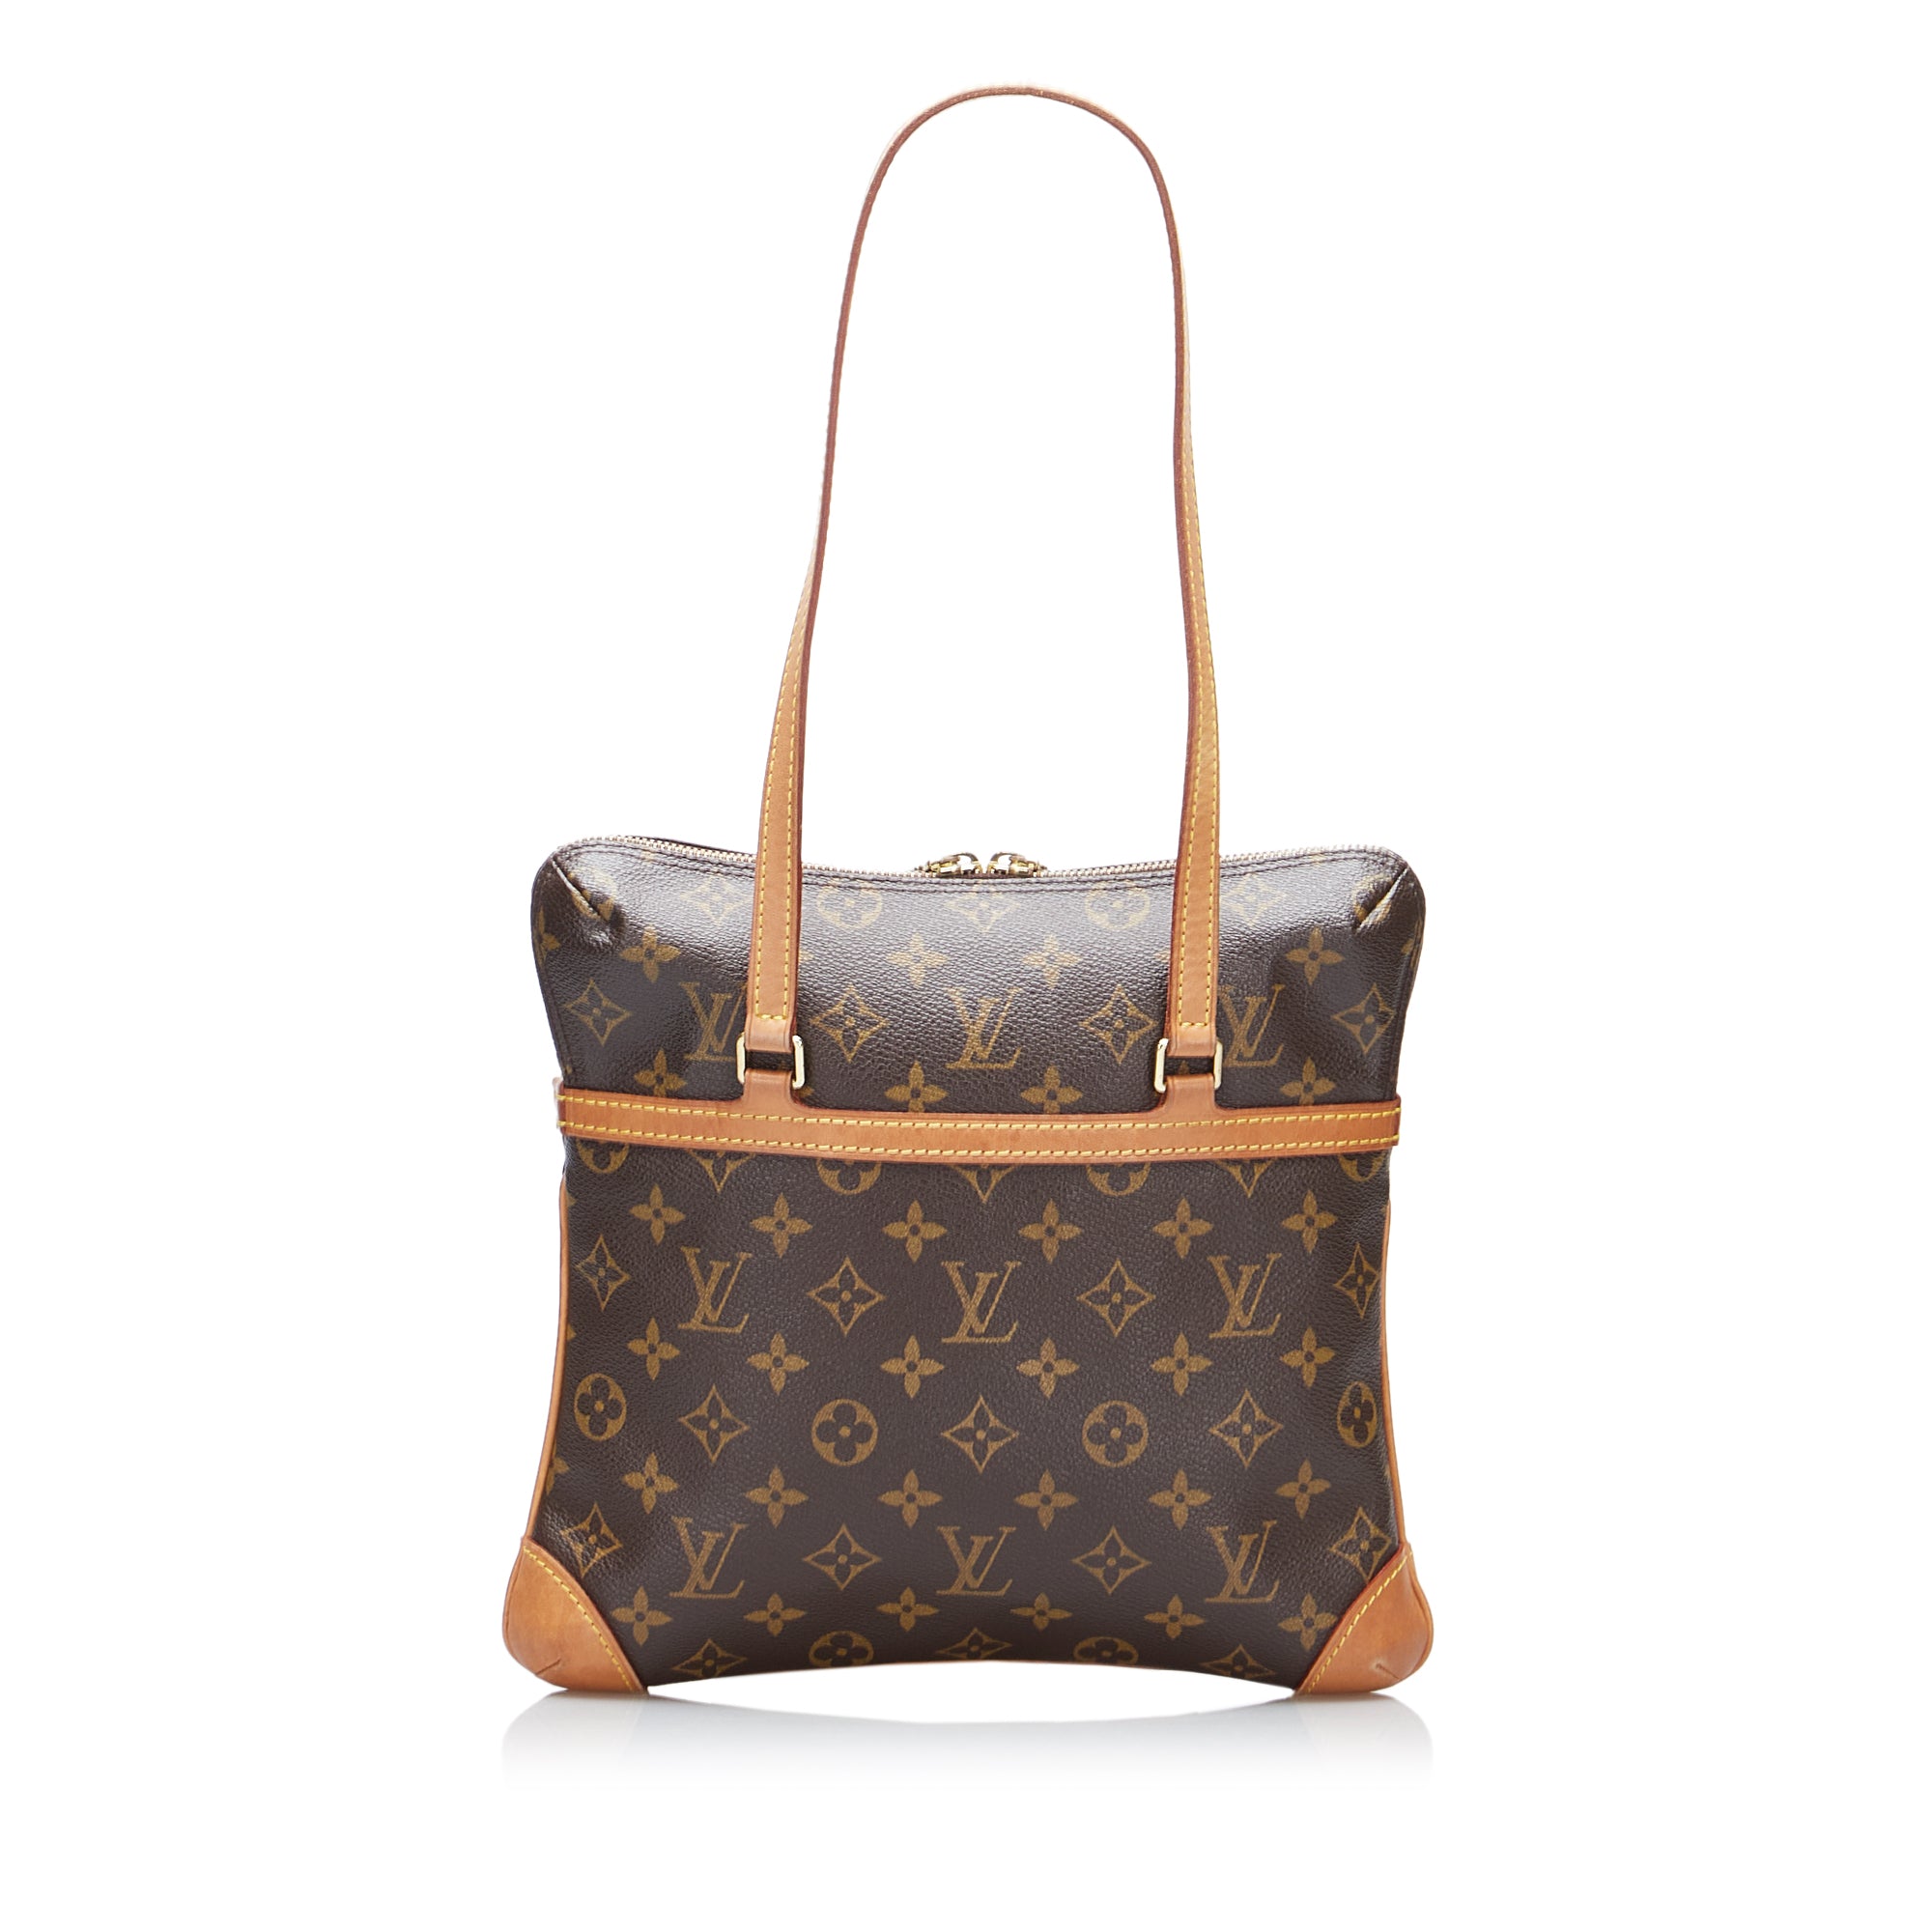 Looking for bags similar to the LV Coussin : r/handbags